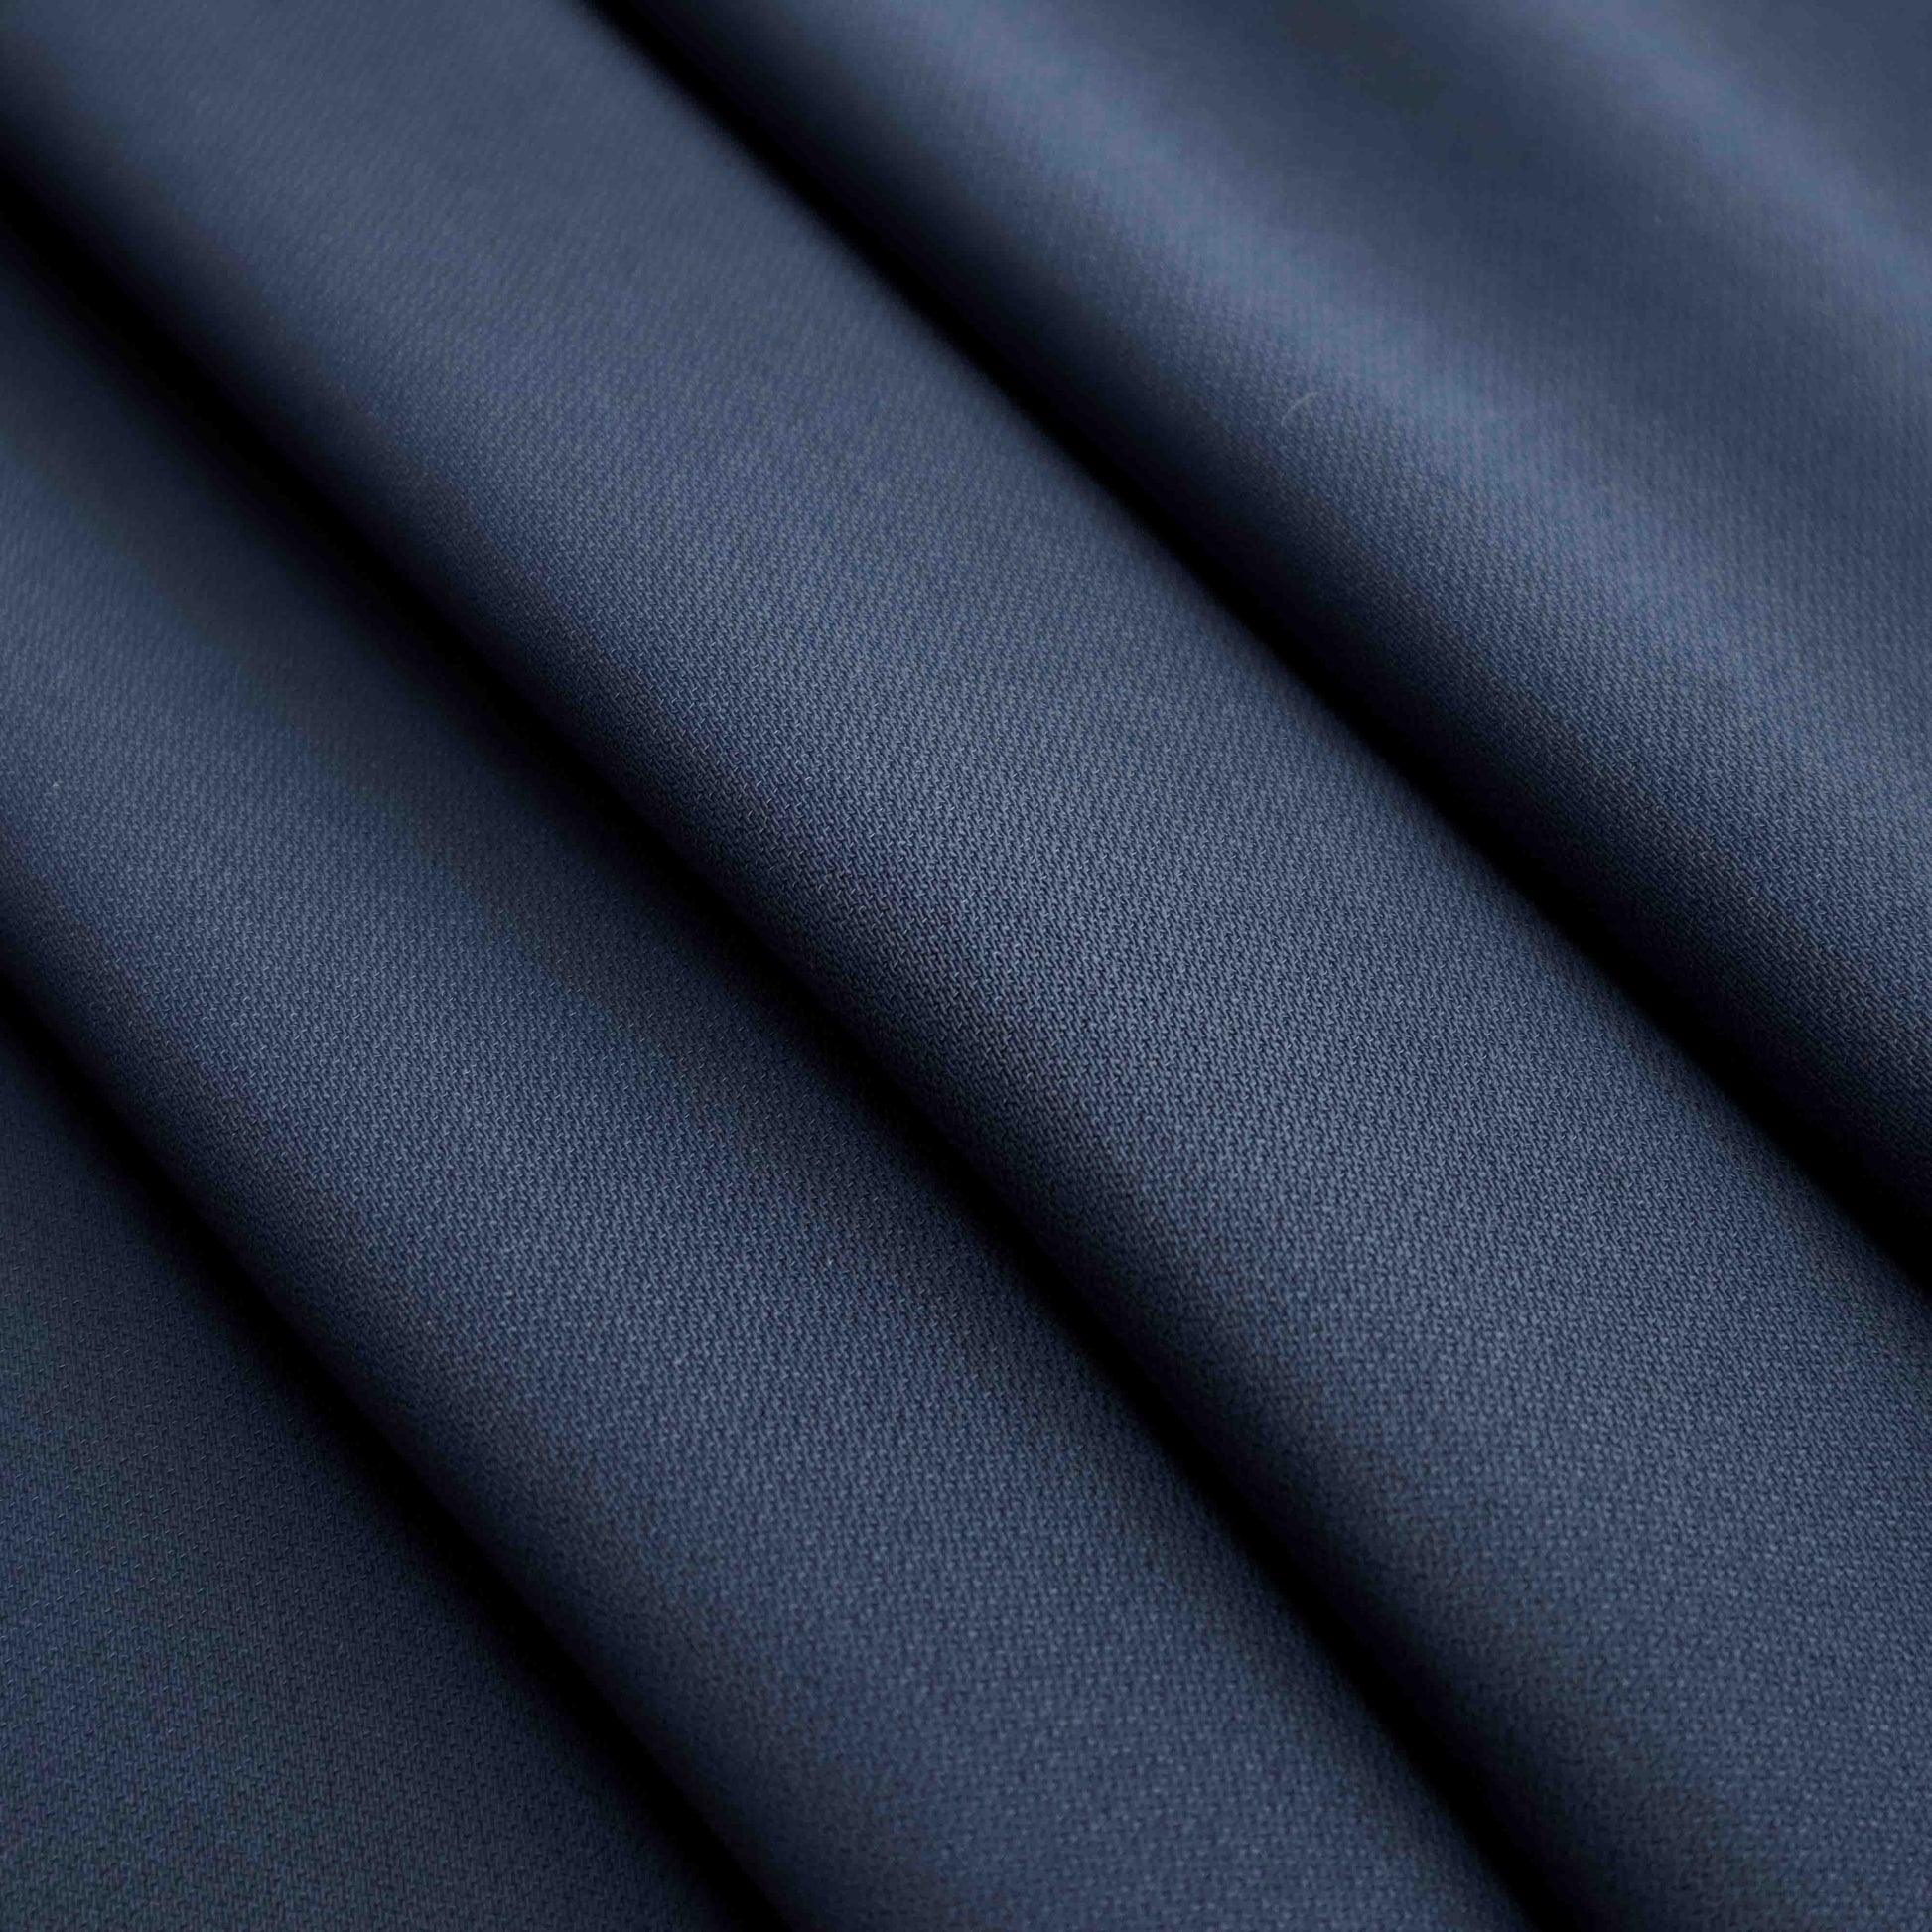 A mid-weight polyester fabric in Deep Cove. This fabric is durable and does not stretch or pill easily like cotton and other natural fibers. It is also wrinkle-resistant and will better hold its shape, drape and rigidity.